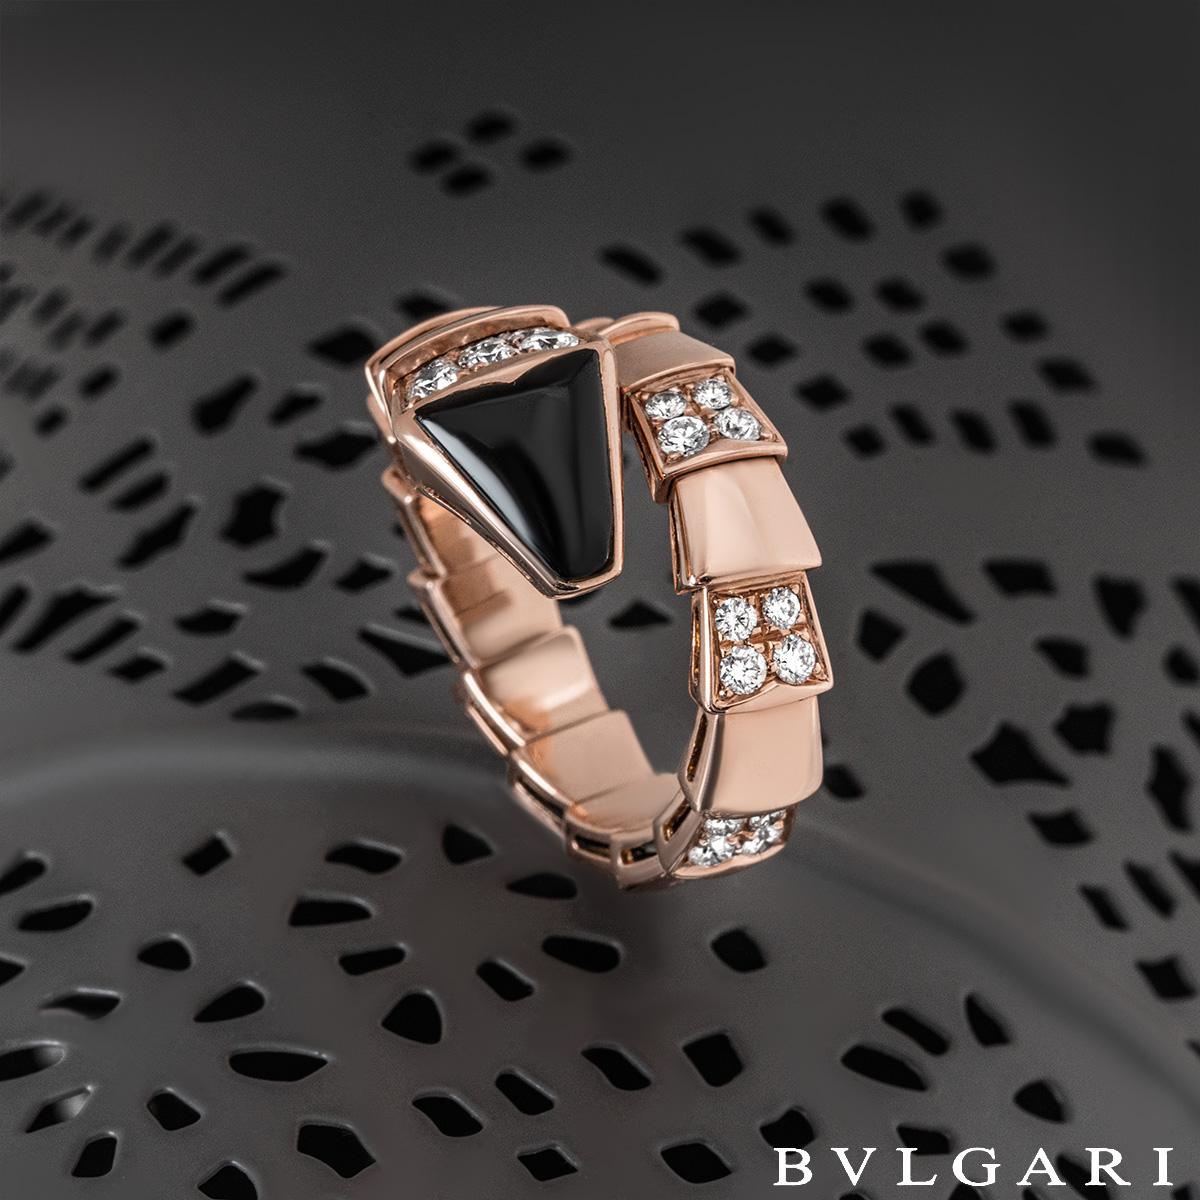 Bvlgari Rose Gold Diamond and Onyx Serpenti Ring In Excellent Condition For Sale In London, GB